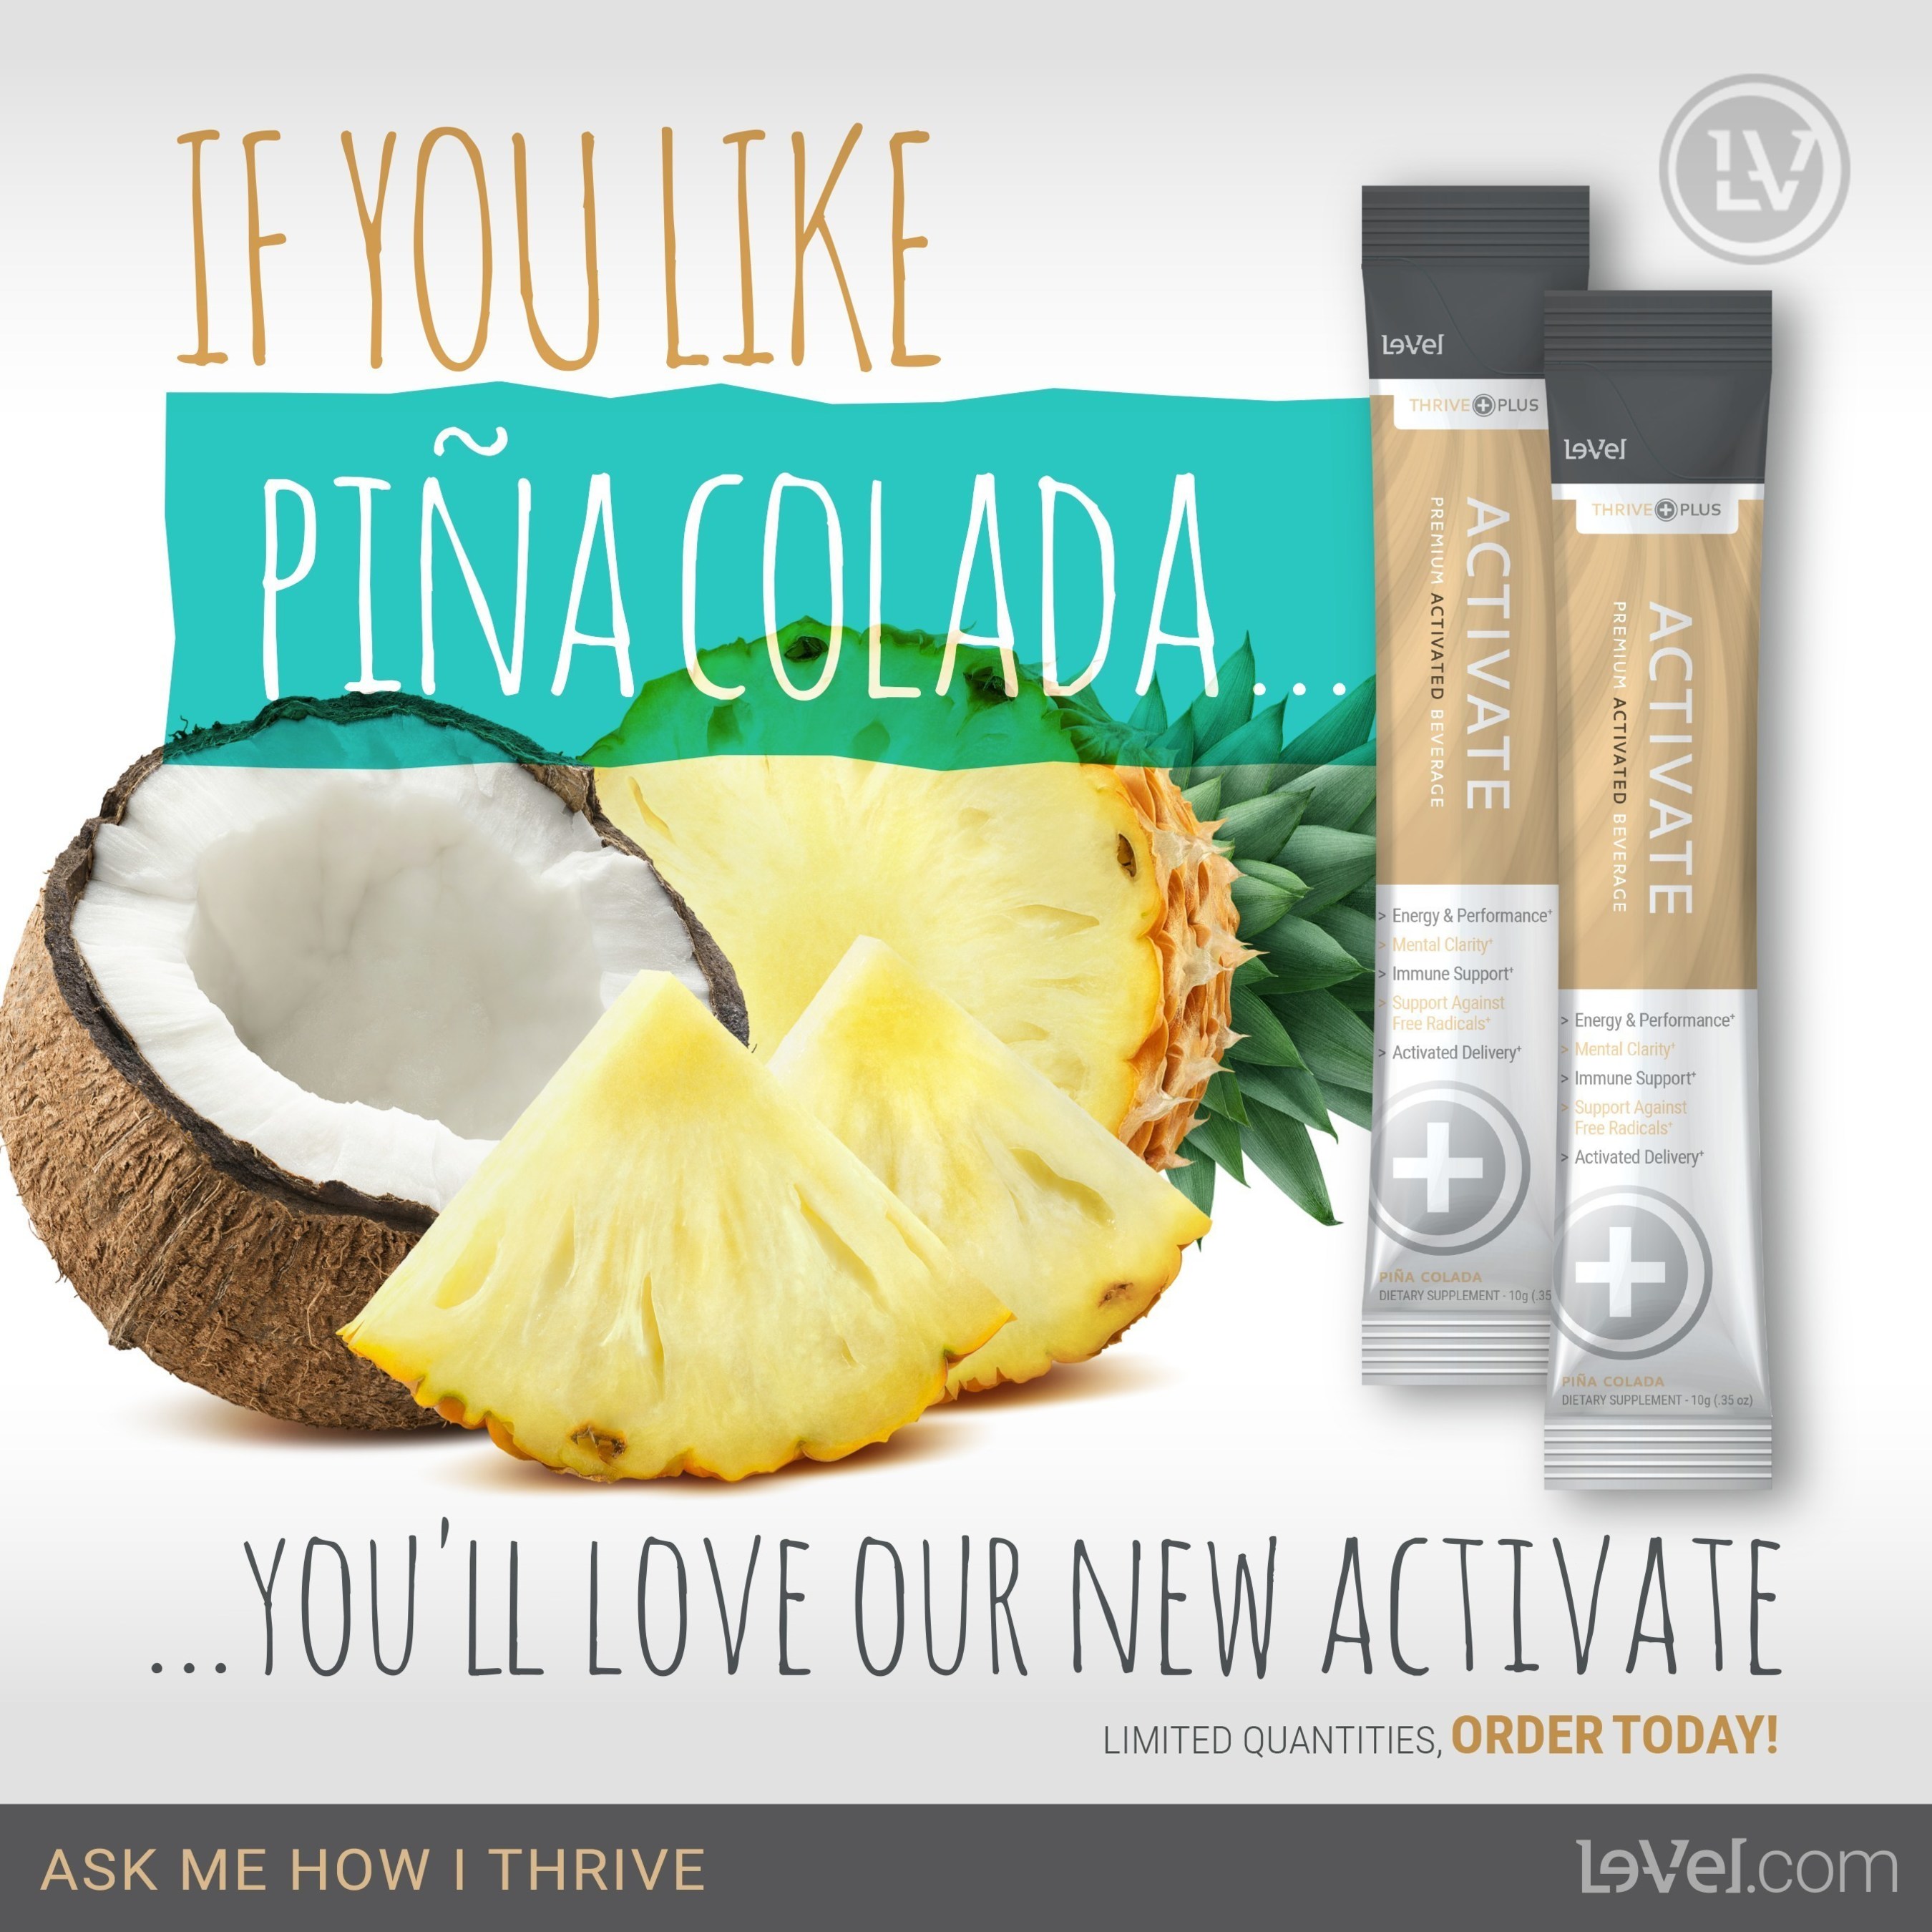 Le-Vel Brands, the world leader in human nutritional innovation, has introduced to its wildly successful THRIVE product line Activate Premium Beverage in an incredible new Pina Colada flavor.